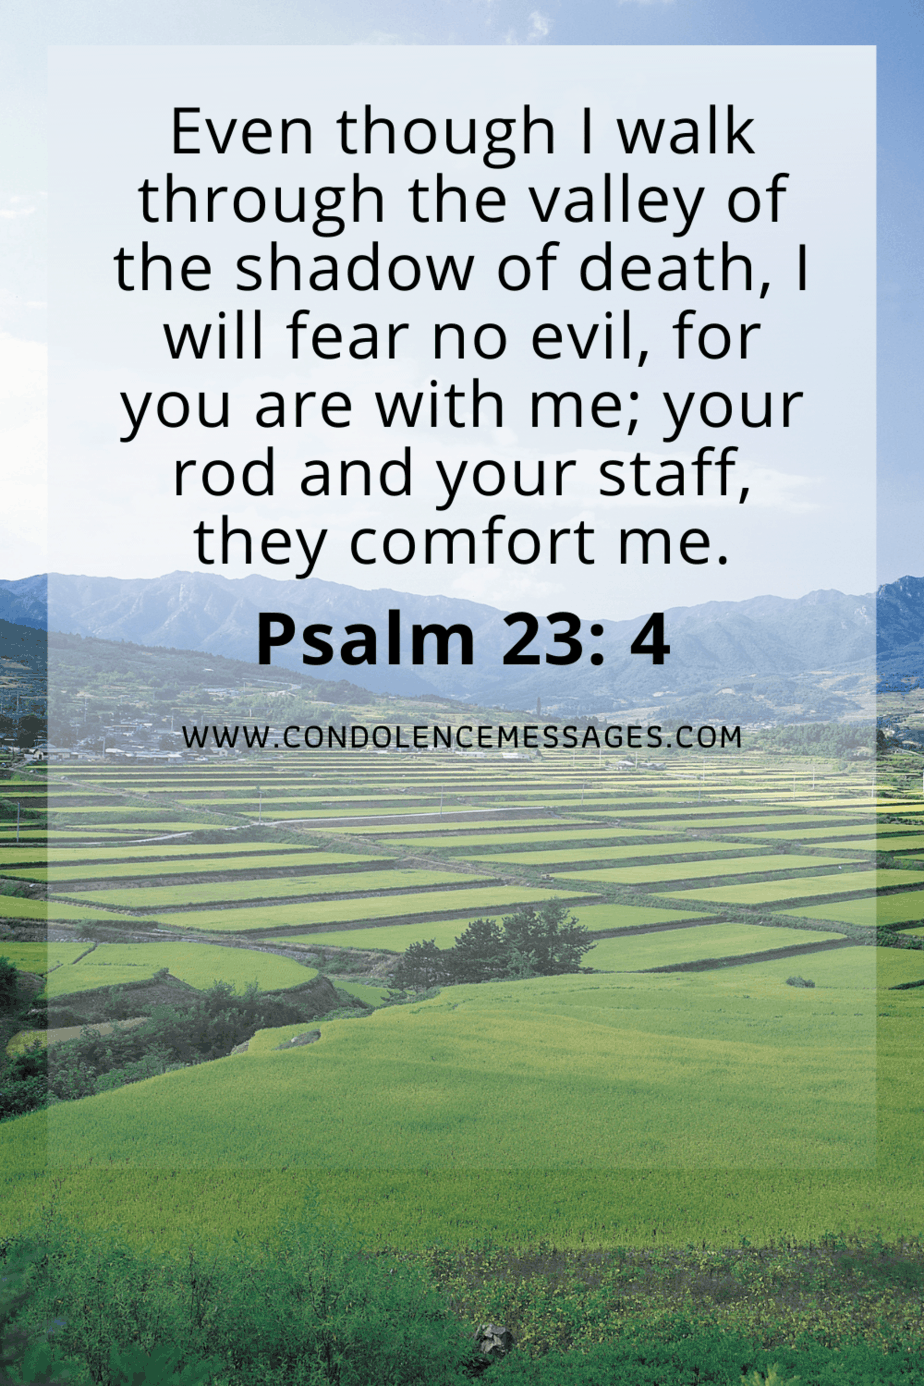 Bible Verses About Death Art Of Condolence